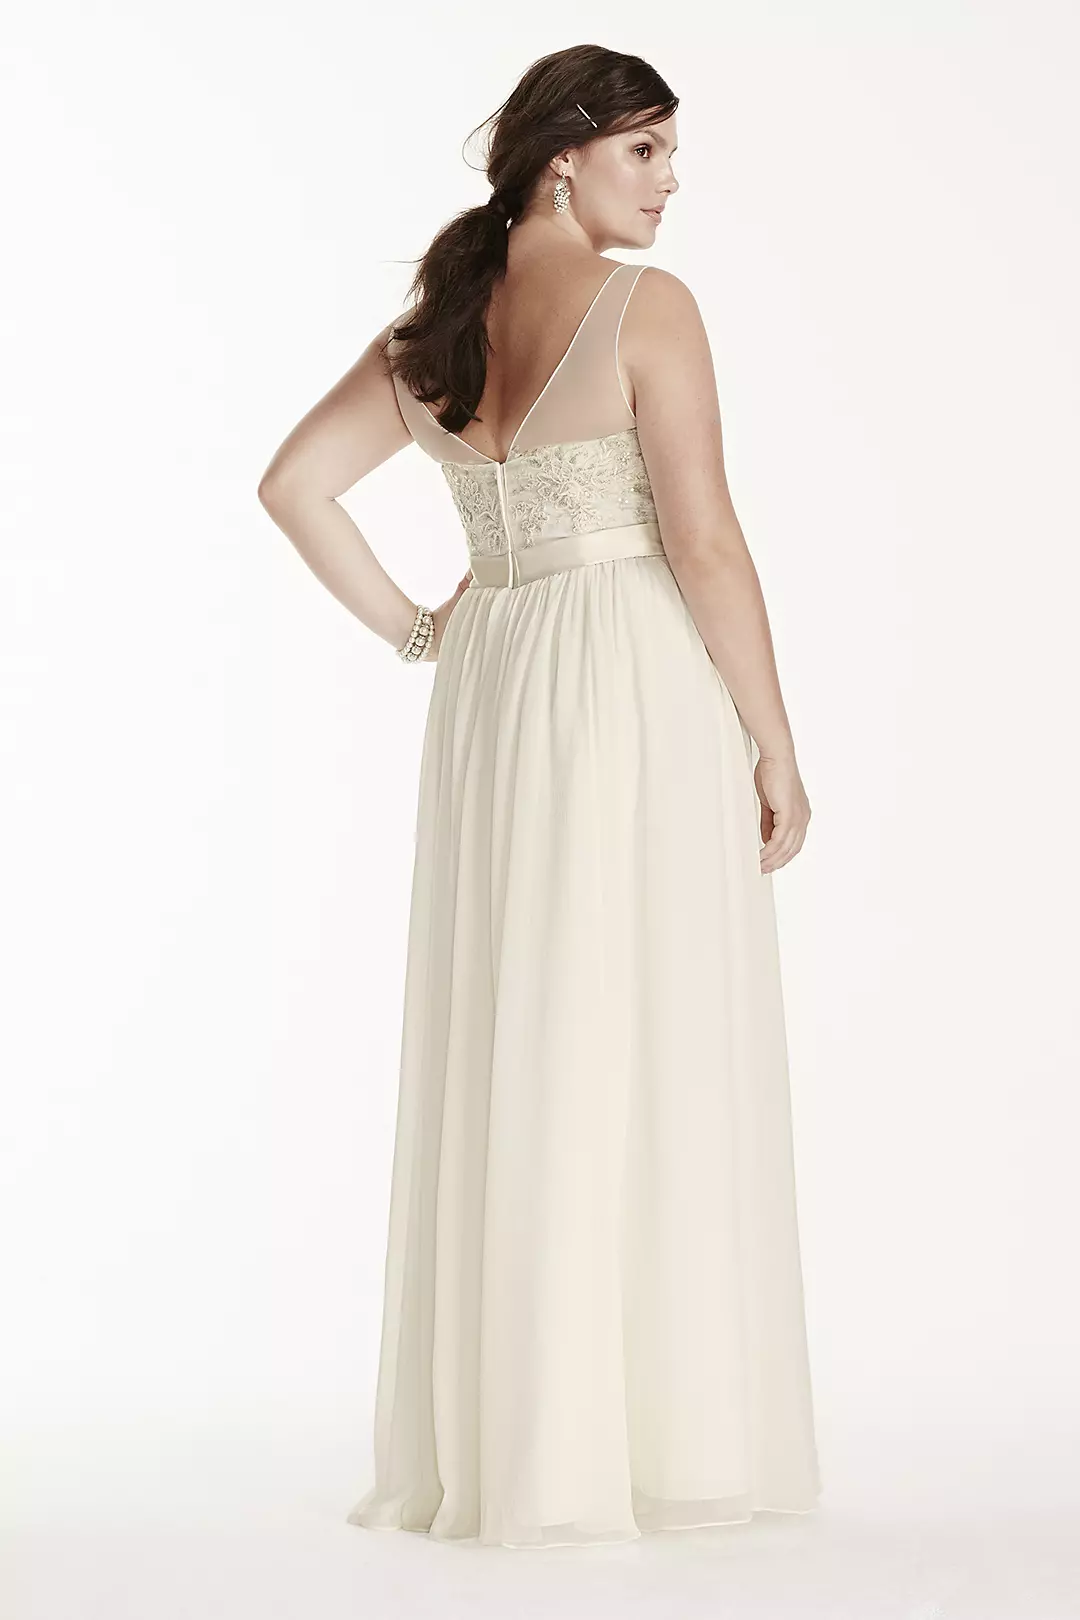 As-Is Tank Plus Size Wedding Dress with Applique Image 2